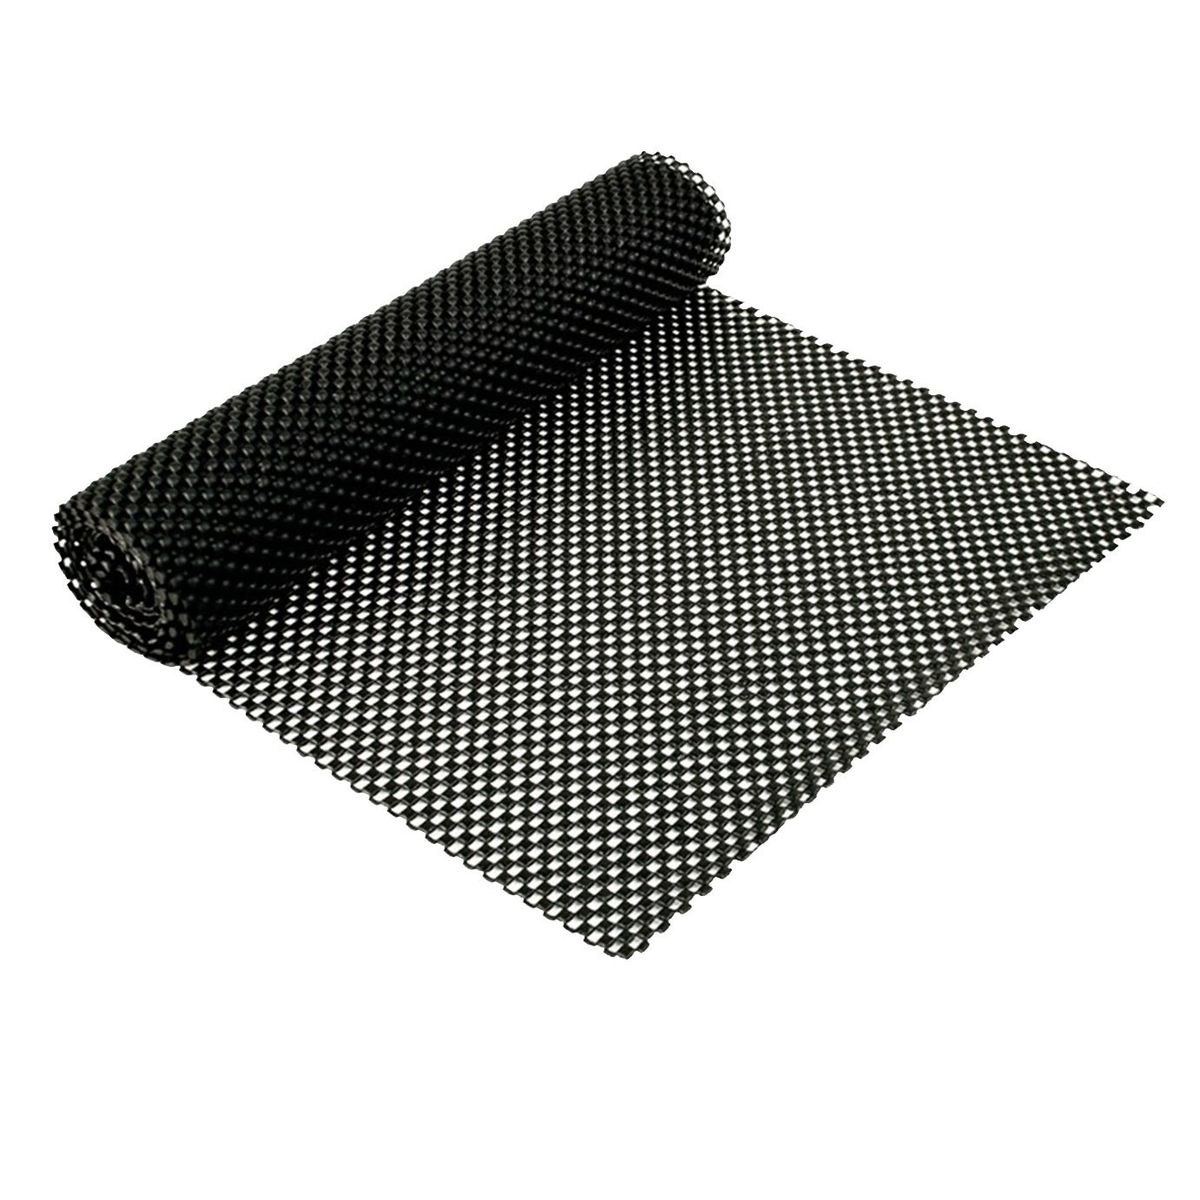 Neuropathie abstract cruise Multi-Purpose Non-Slip Mat (30 x 150cm) | Buy Online in South Africa |  takealot.com